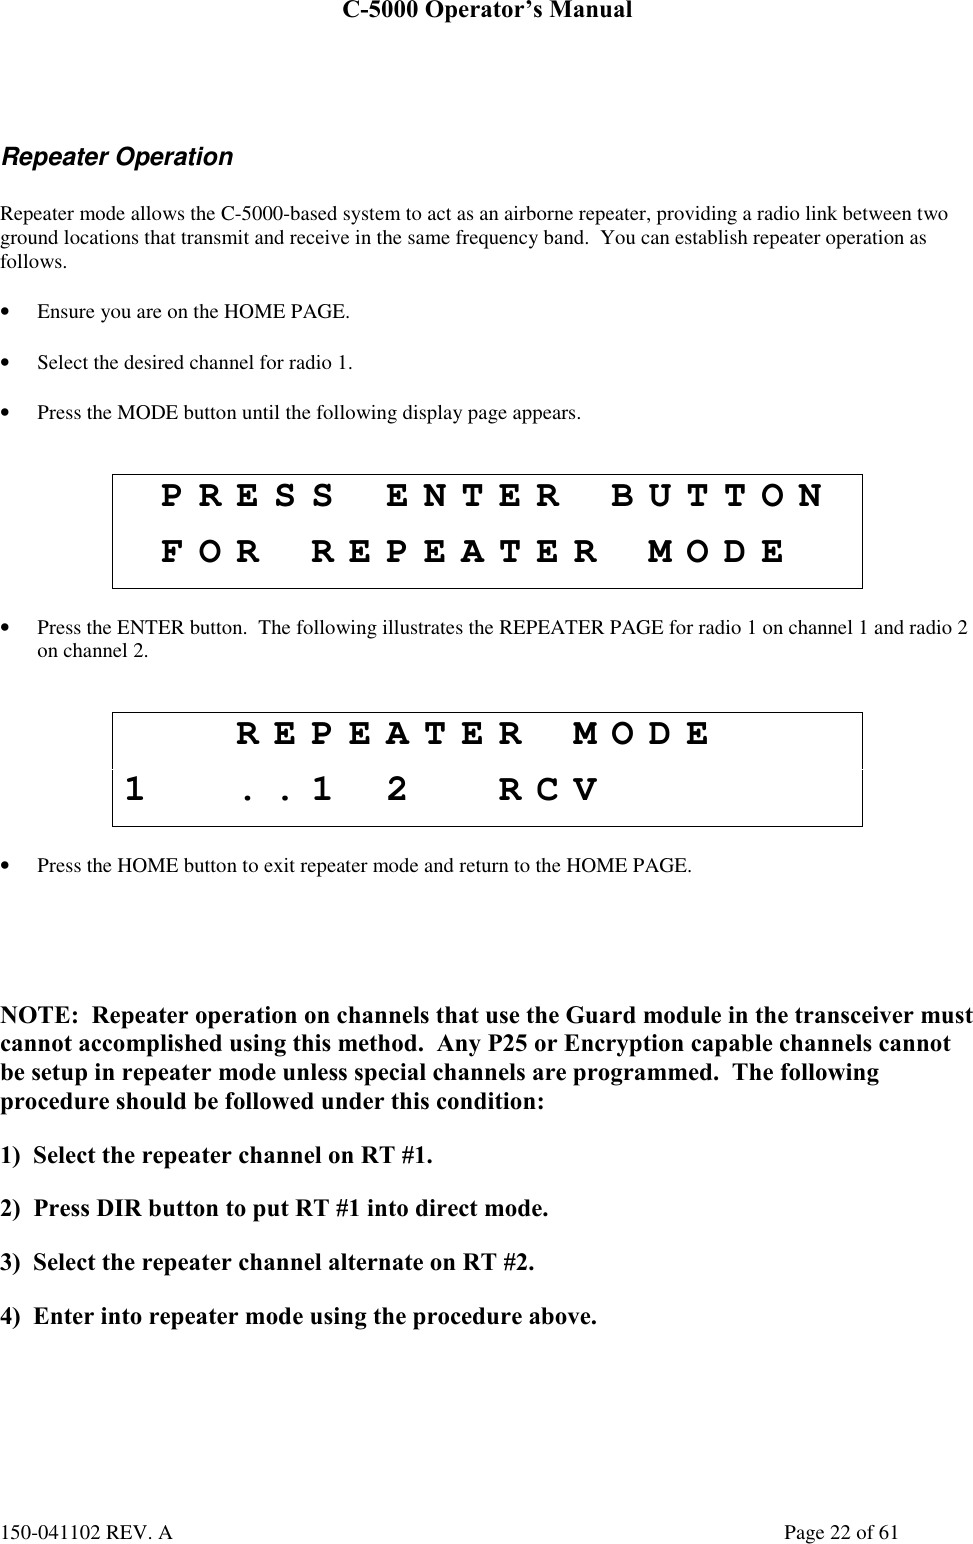 C-5000 Operator’s Manual150-041102 REV. A Page 22 of 61Repeater OperationRepeater mode allows the C-5000-based system to act as an airborne repeater, providing a radio link between twoground locations that transmit and receive in the same frequency band.  You can establish repeater operation asfollows.• Ensure you are on the HOME PAGE.• Select the desired channel for radio 1.• Press the MODE button until the following display page appears.PRESS ENTER BUTTONFOR REPEATER MODE• Press the ENTER button.  The following illustrates the REPEATER PAGE for radio 1 on channel 1 and radio 2on channel 2.REPEATER MODE1 ..1 2 RCV• Press the HOME button to exit repeater mode and return to the HOME PAGE.NOTE:  Repeater operation on channels that use the Guard module in the transceiver mustcannot accomplished using this method.  Any P25 or Encryption capable channels cannotbe setup in repeater mode unless special channels are programmed.  The followingprocedure should be followed under this condition:1)  Select the repeater channel on RT #1.2)  Press DIR button to put RT #1 into direct mode.3)  Select the repeater channel alternate on RT #2.4)  Enter into repeater mode using the procedure above.